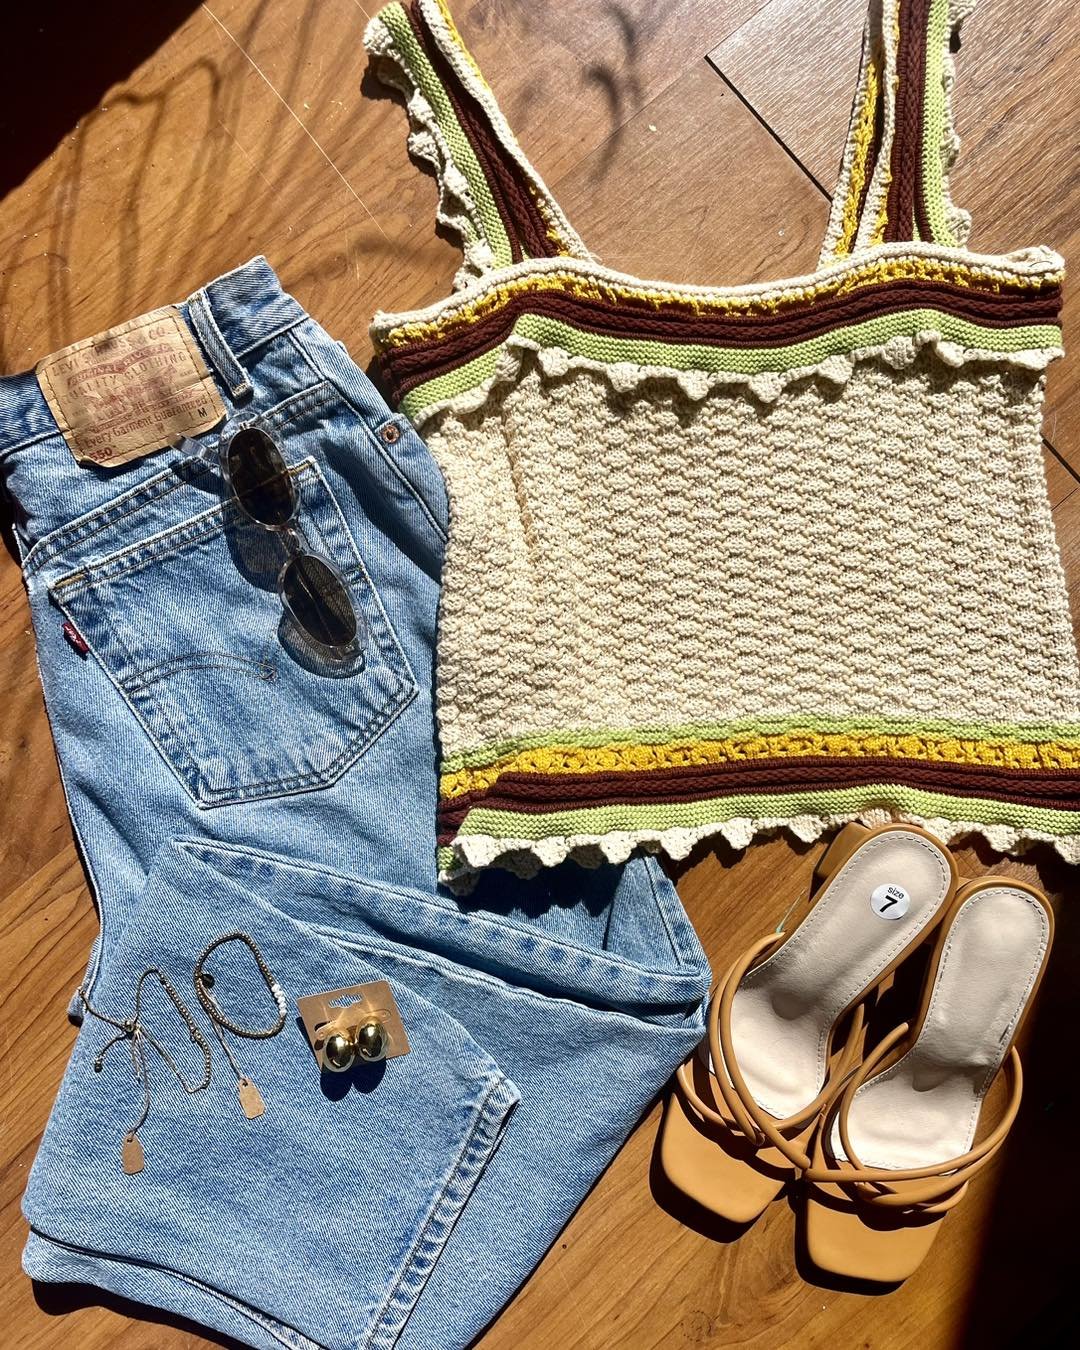 From clothing and shoes to accessories we&rsquo;ve got it all here at Sequels!💁&zwj;♀️🛍️

Come shop today! We&rsquo;ve got lots a new summer inventory for all! 👗☀️🩴
&bull;
&bull;
&bull;
Top: medium, $7.99
Jeans: 12, $12.99
Shoes: 7, $9.99